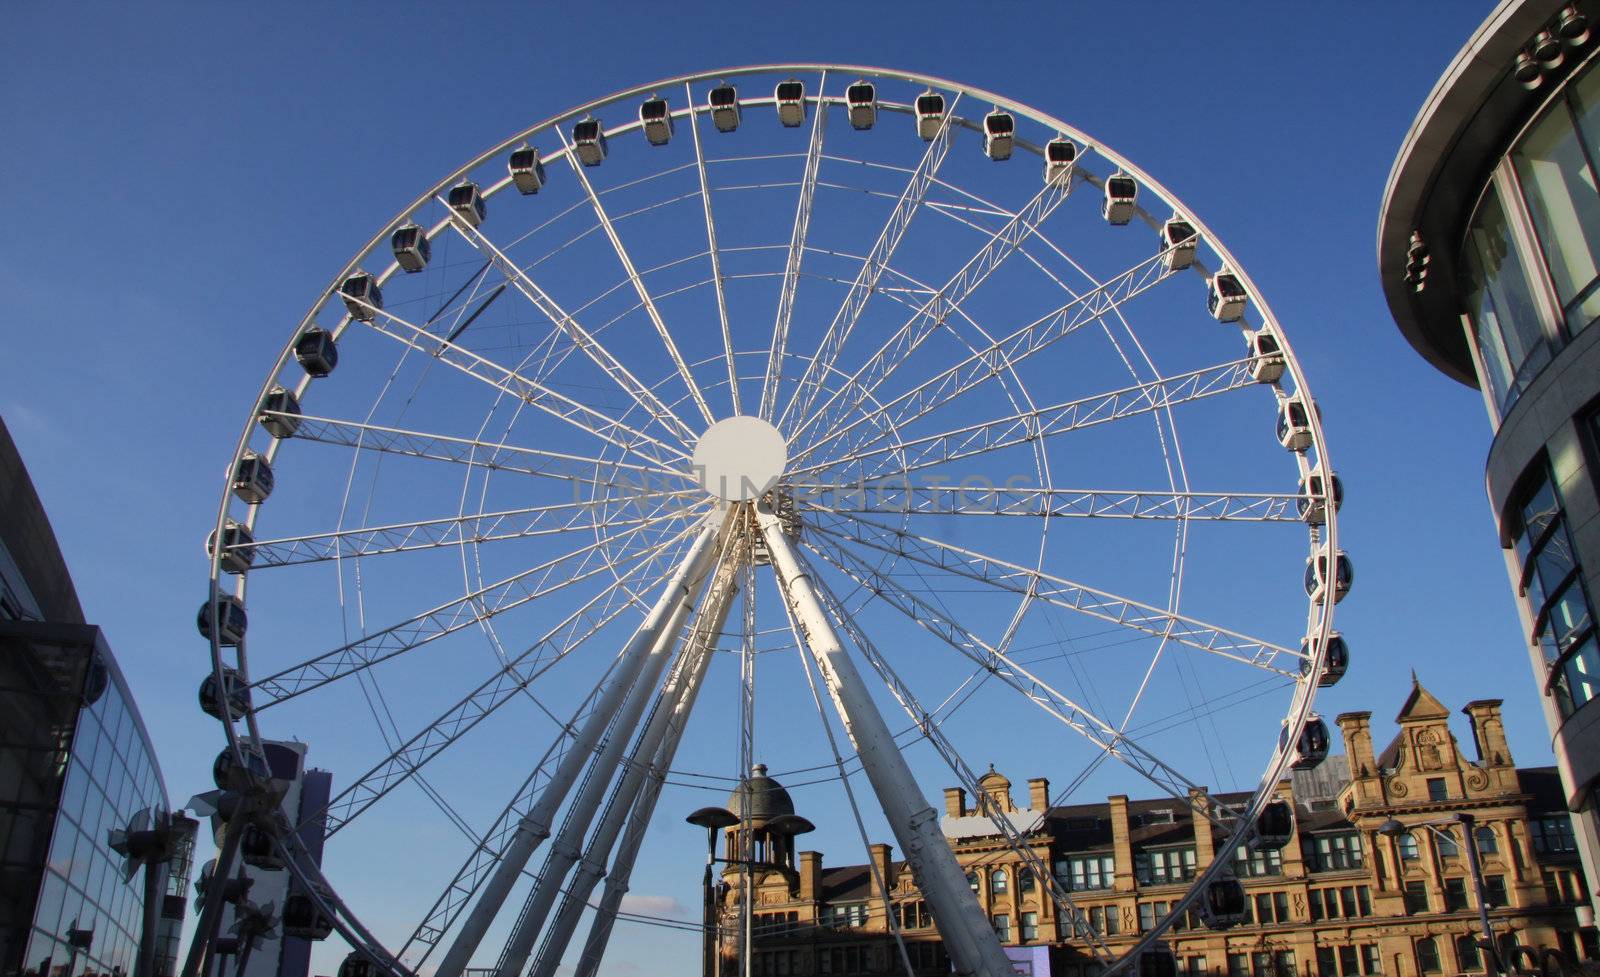 Manchester eye, big wheel in the city centre of Manchester England